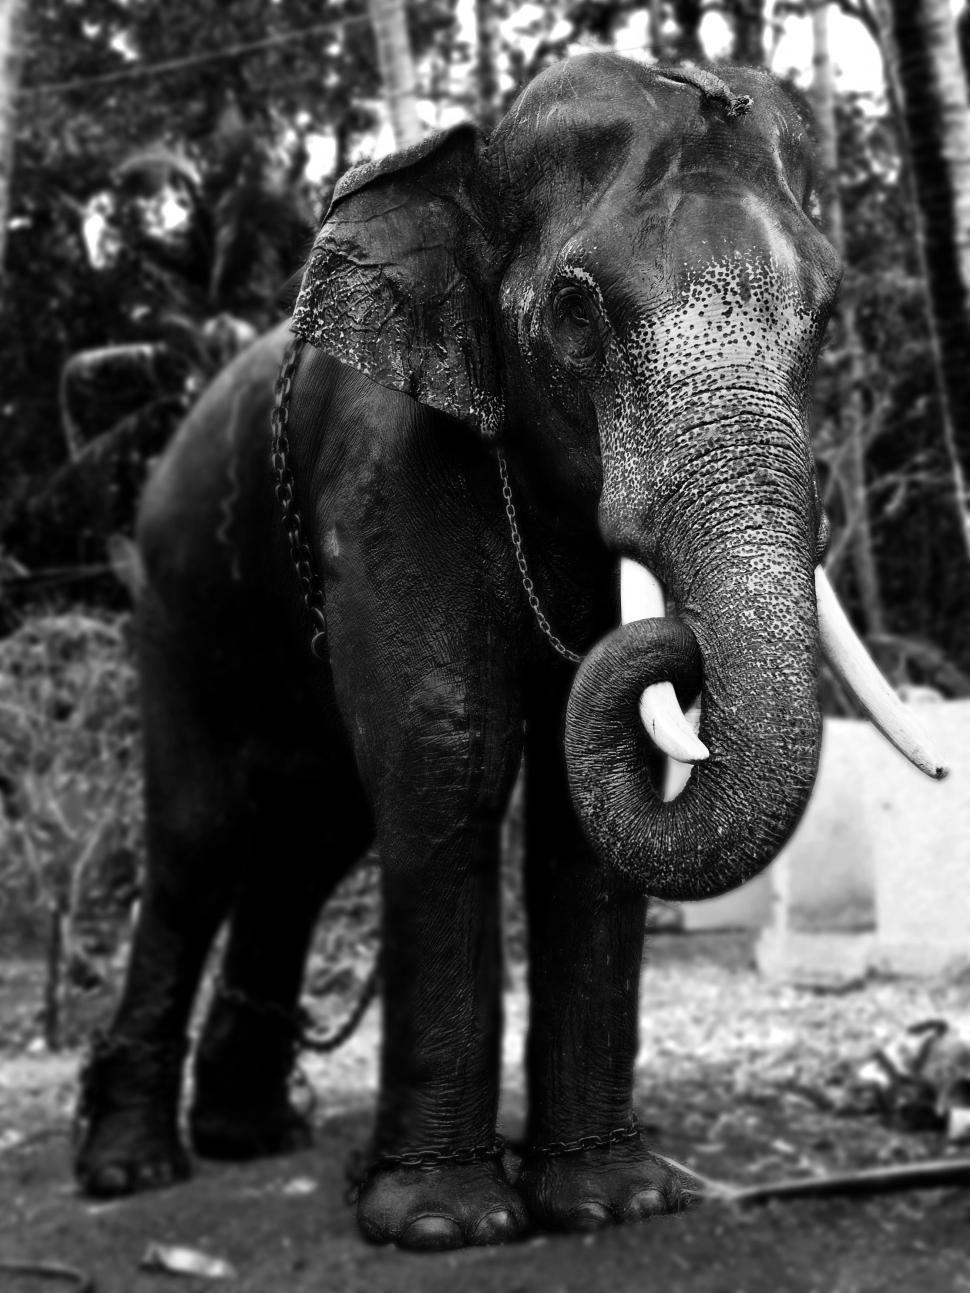 Free Image of Majestic Elephant in Black and White 